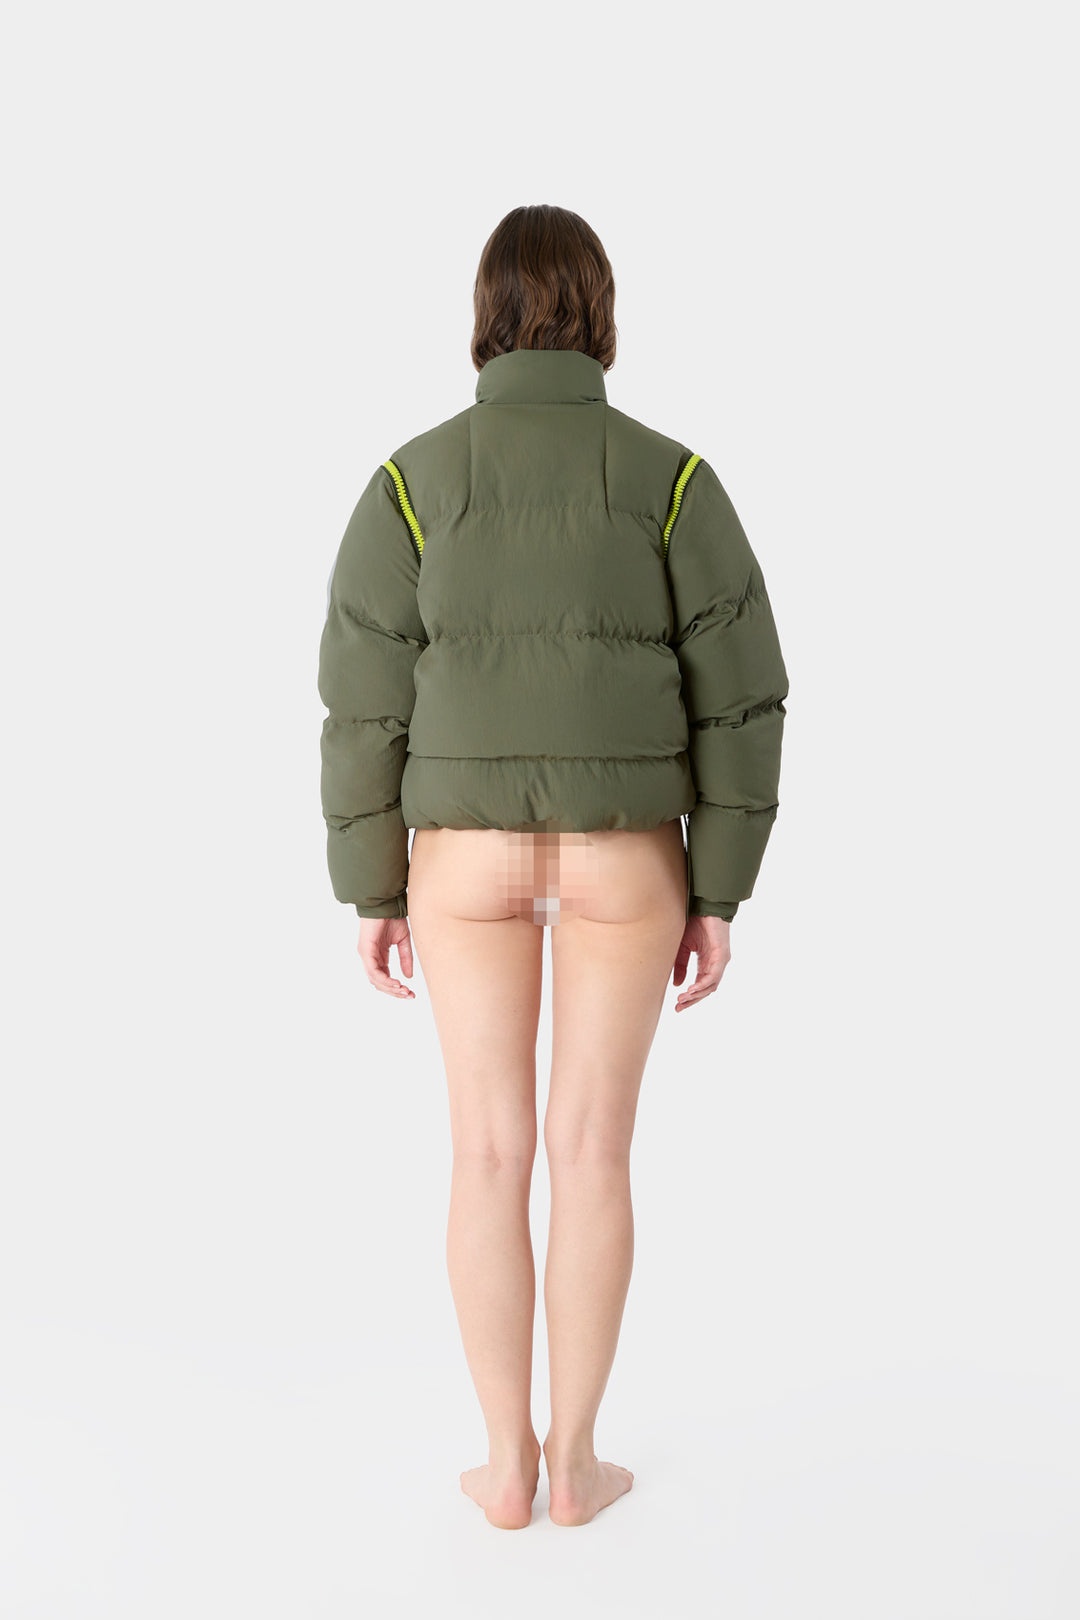 DOWN JACKET / military green - 7